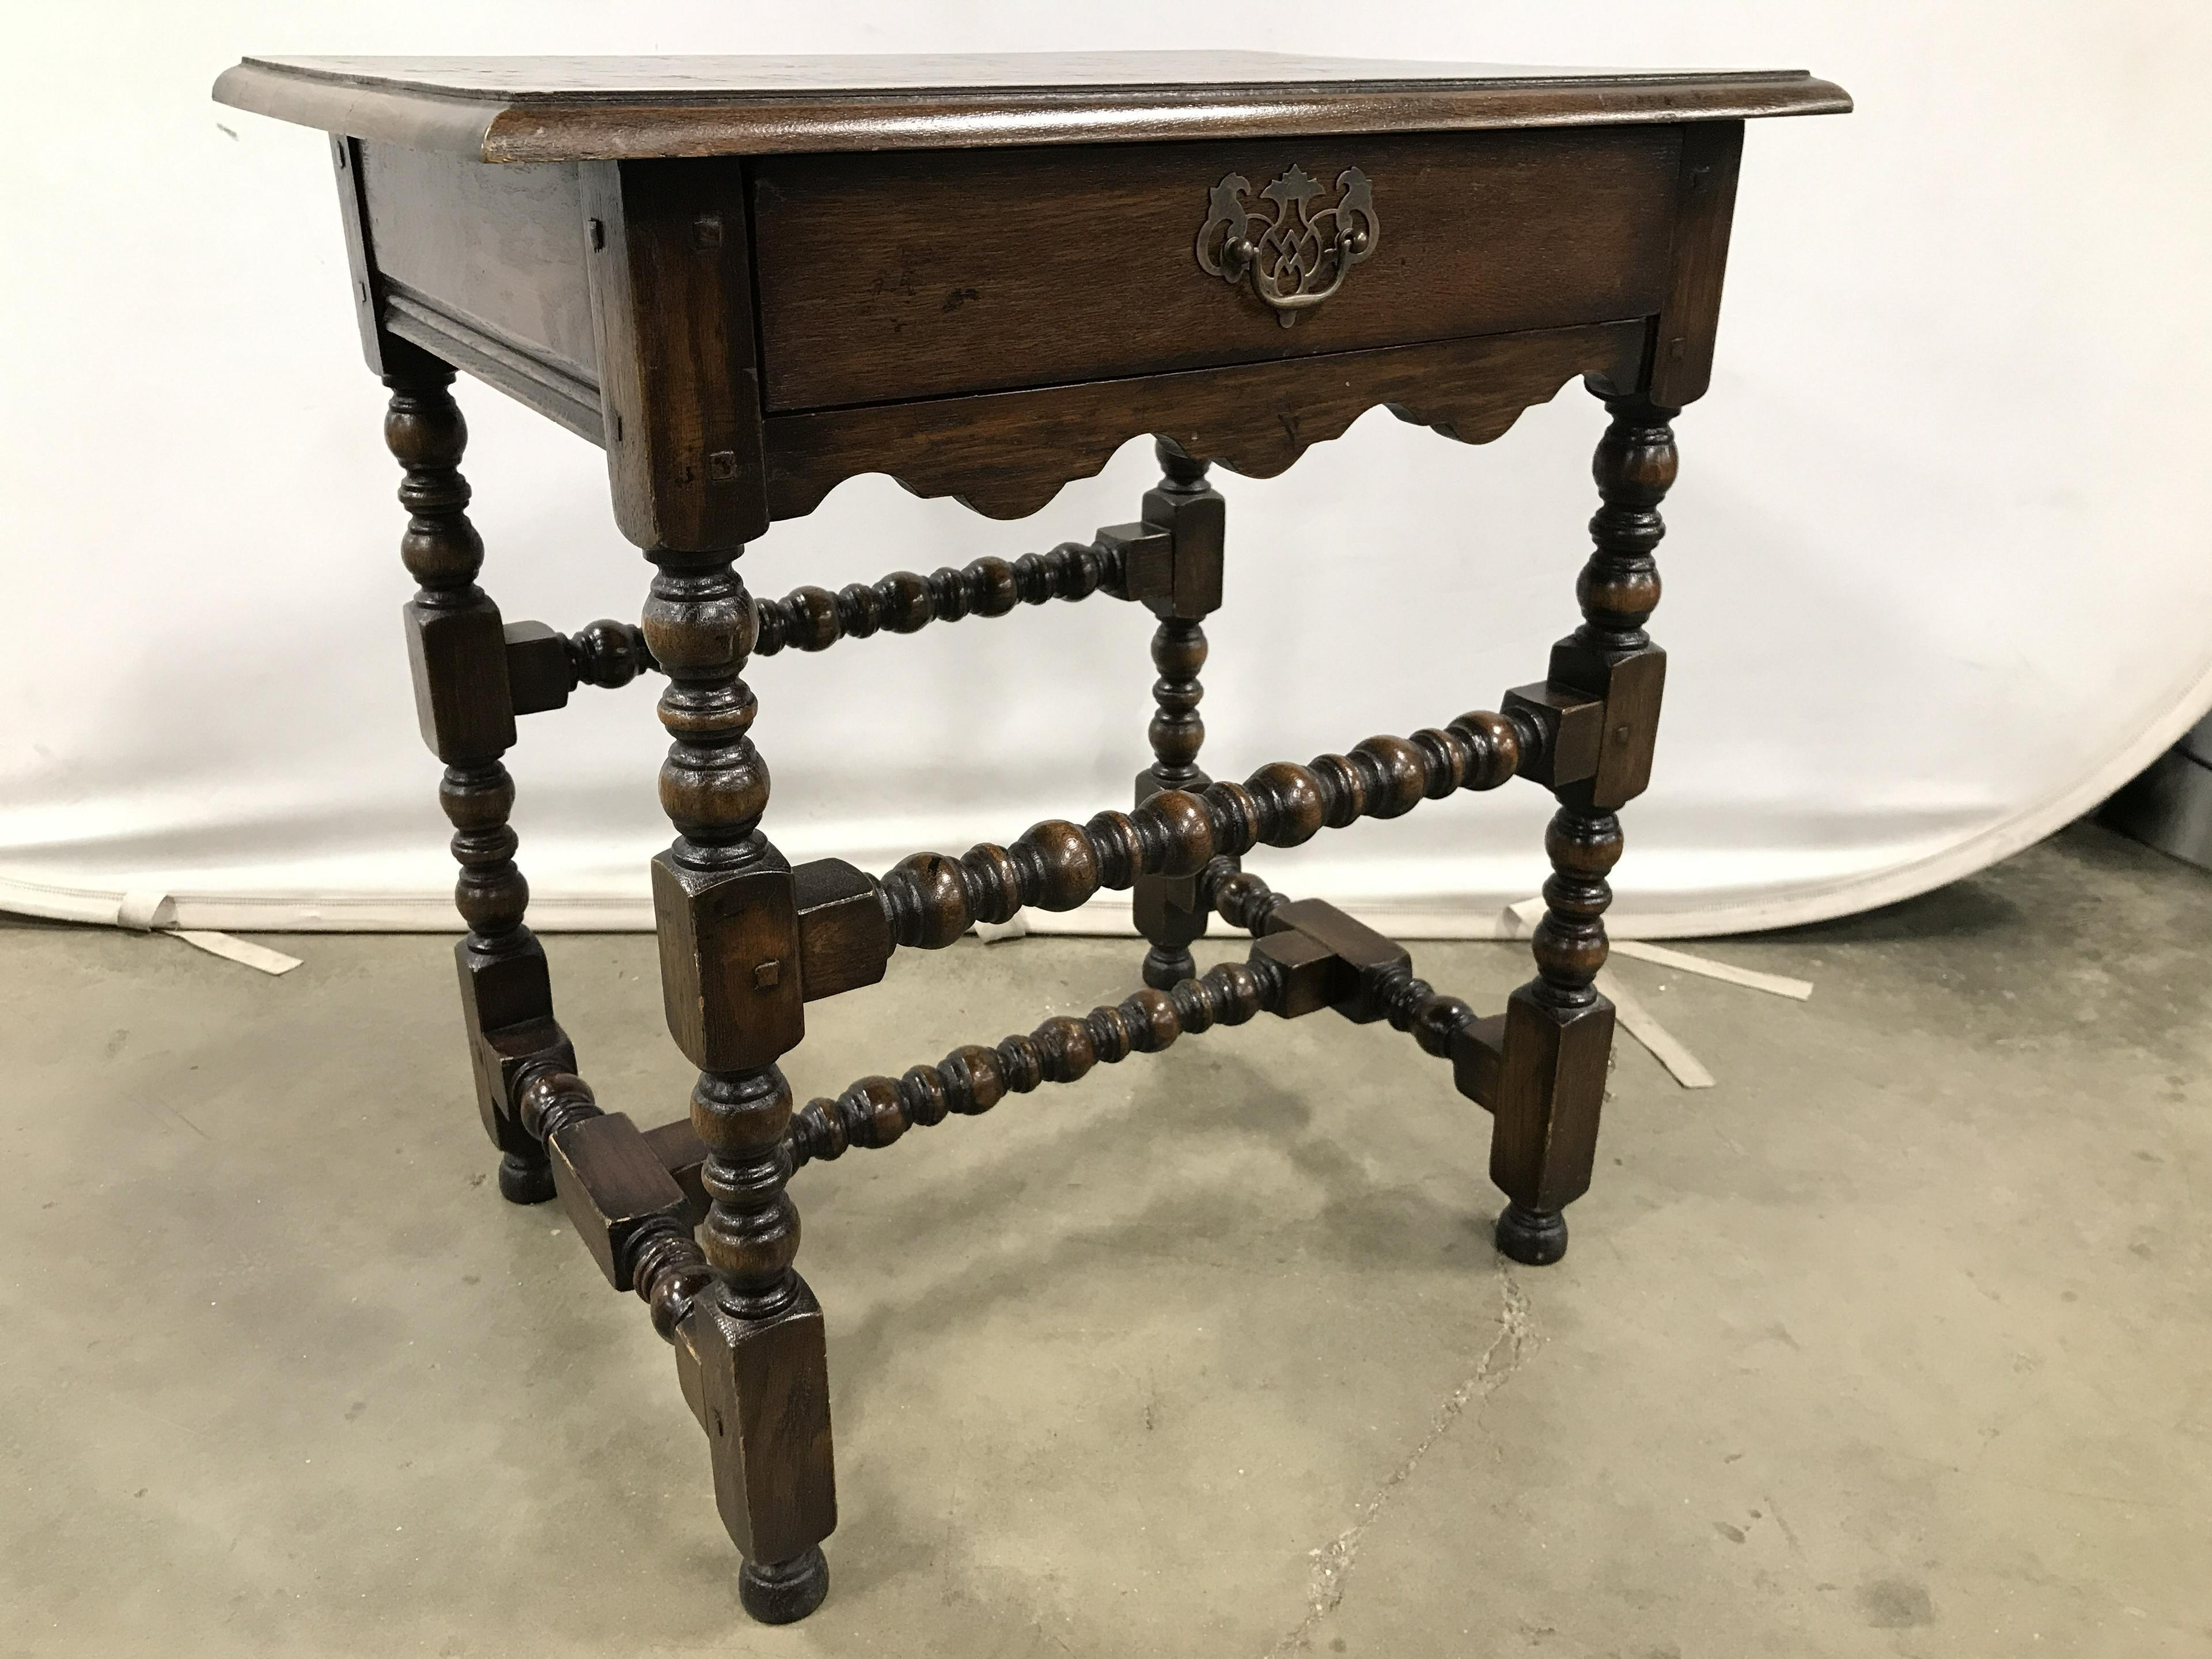 Antique French side table with one dovetailed drawer and intricately carved barley twist legs and stretchers. Brass drawer pull. Table has wonderful aged patina.
Search terms: Side table, wooden side table, end table, side table with drawer,